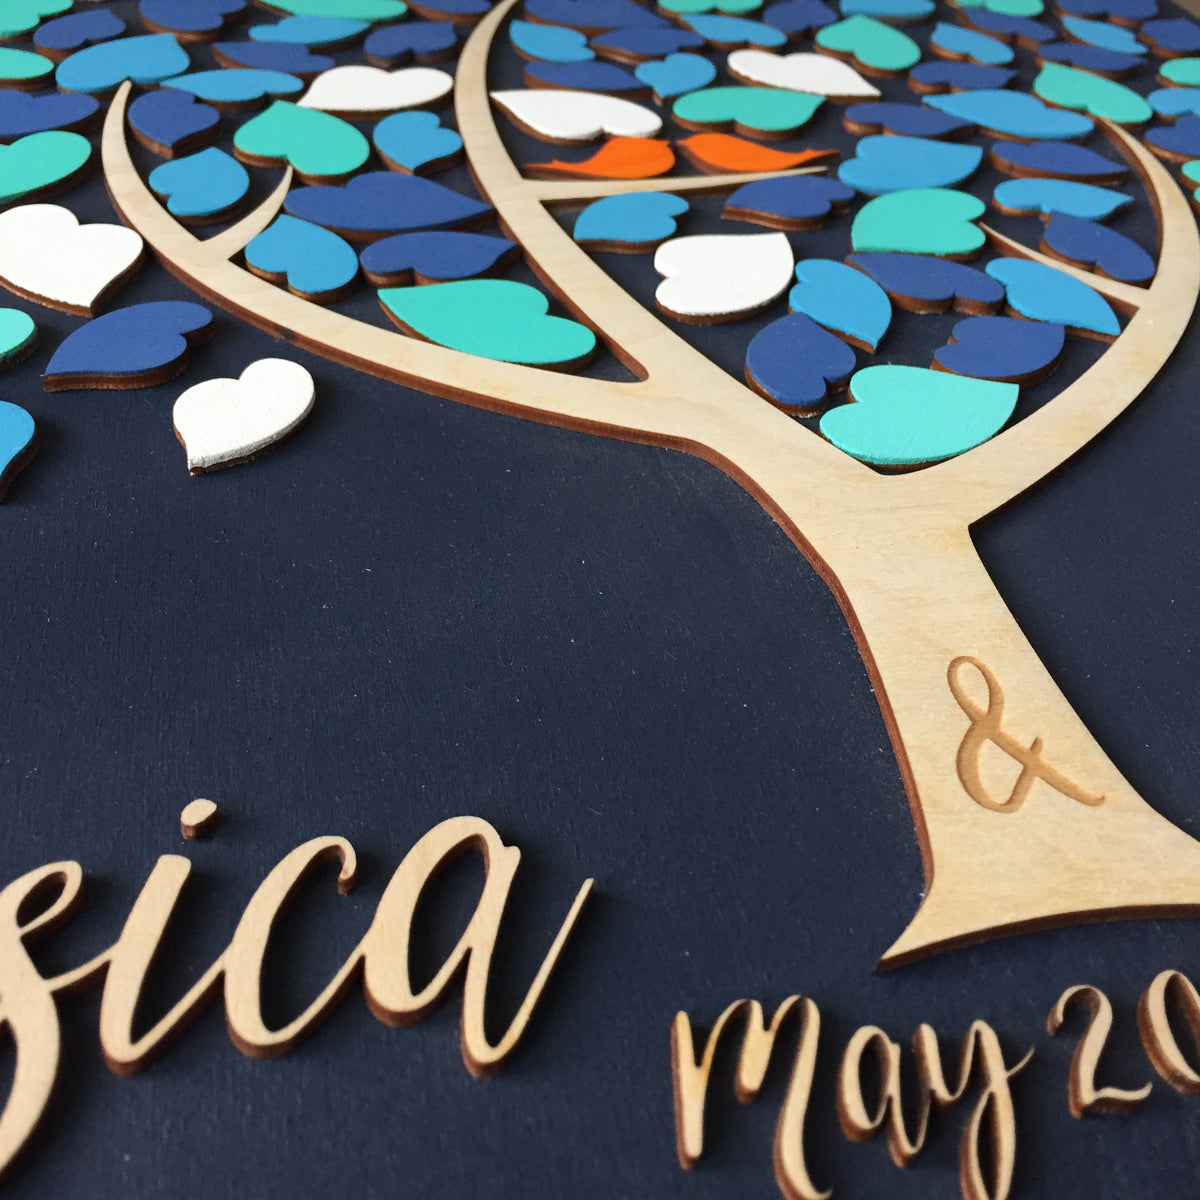 Love Wedding Guest Book Personalized Wooden Family Tree Guestbook Diy Photo  Signature Books Memory Album Anniversary Gift